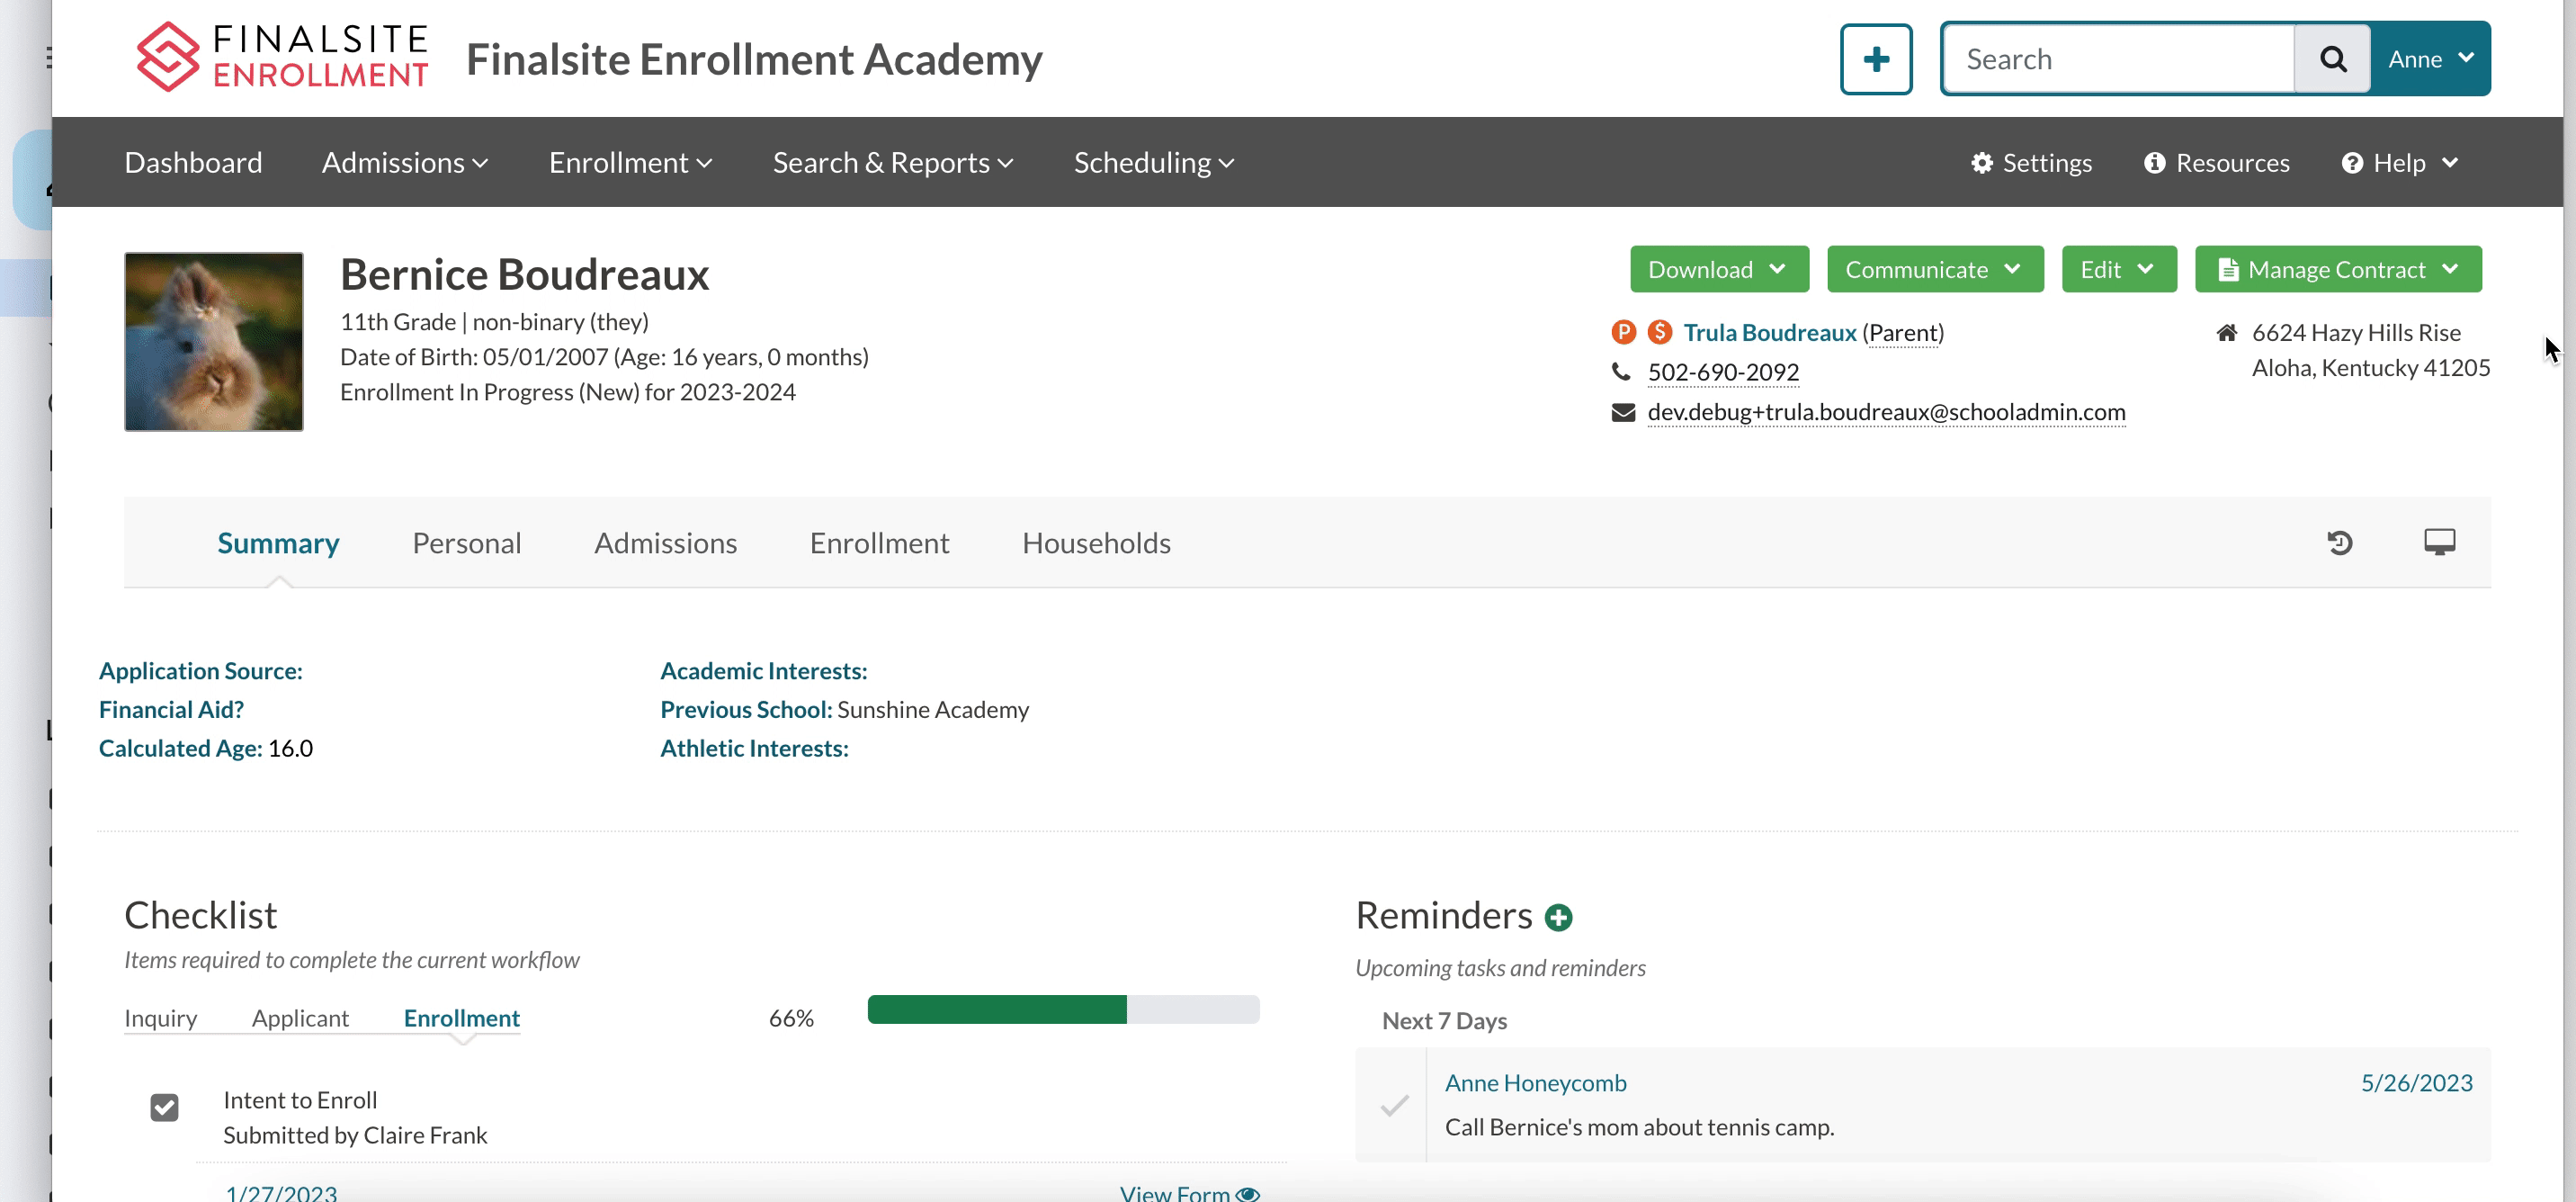 GIF of the Preview Tuition & Fees option.